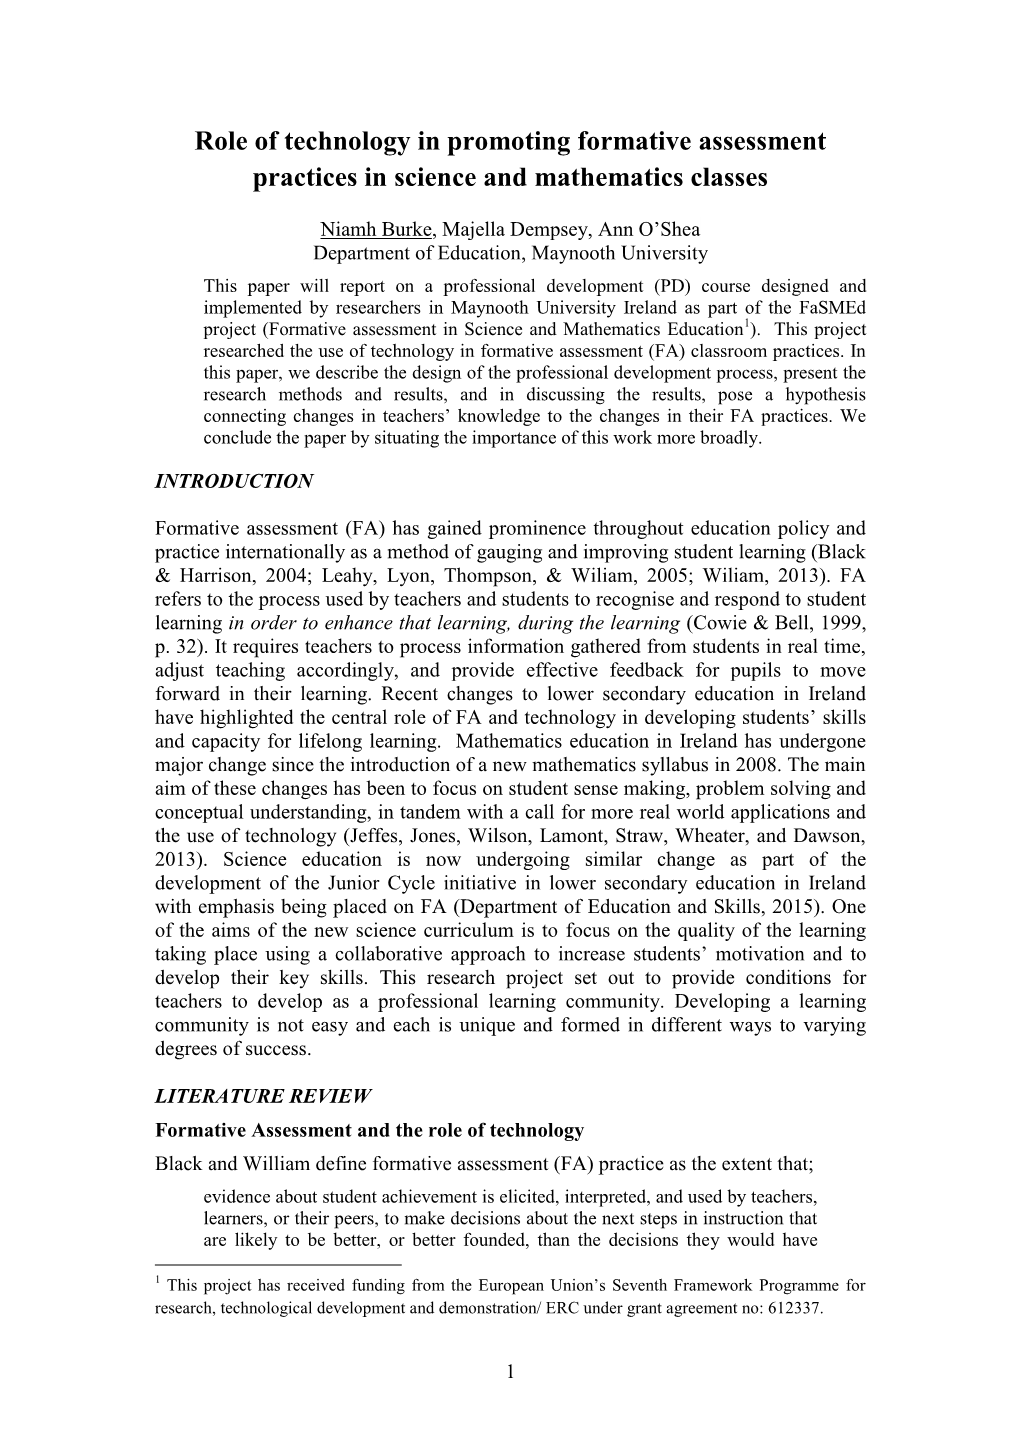 Role of Technology in Promoting Formative Assessment Practices in Science and Mathematics Classes